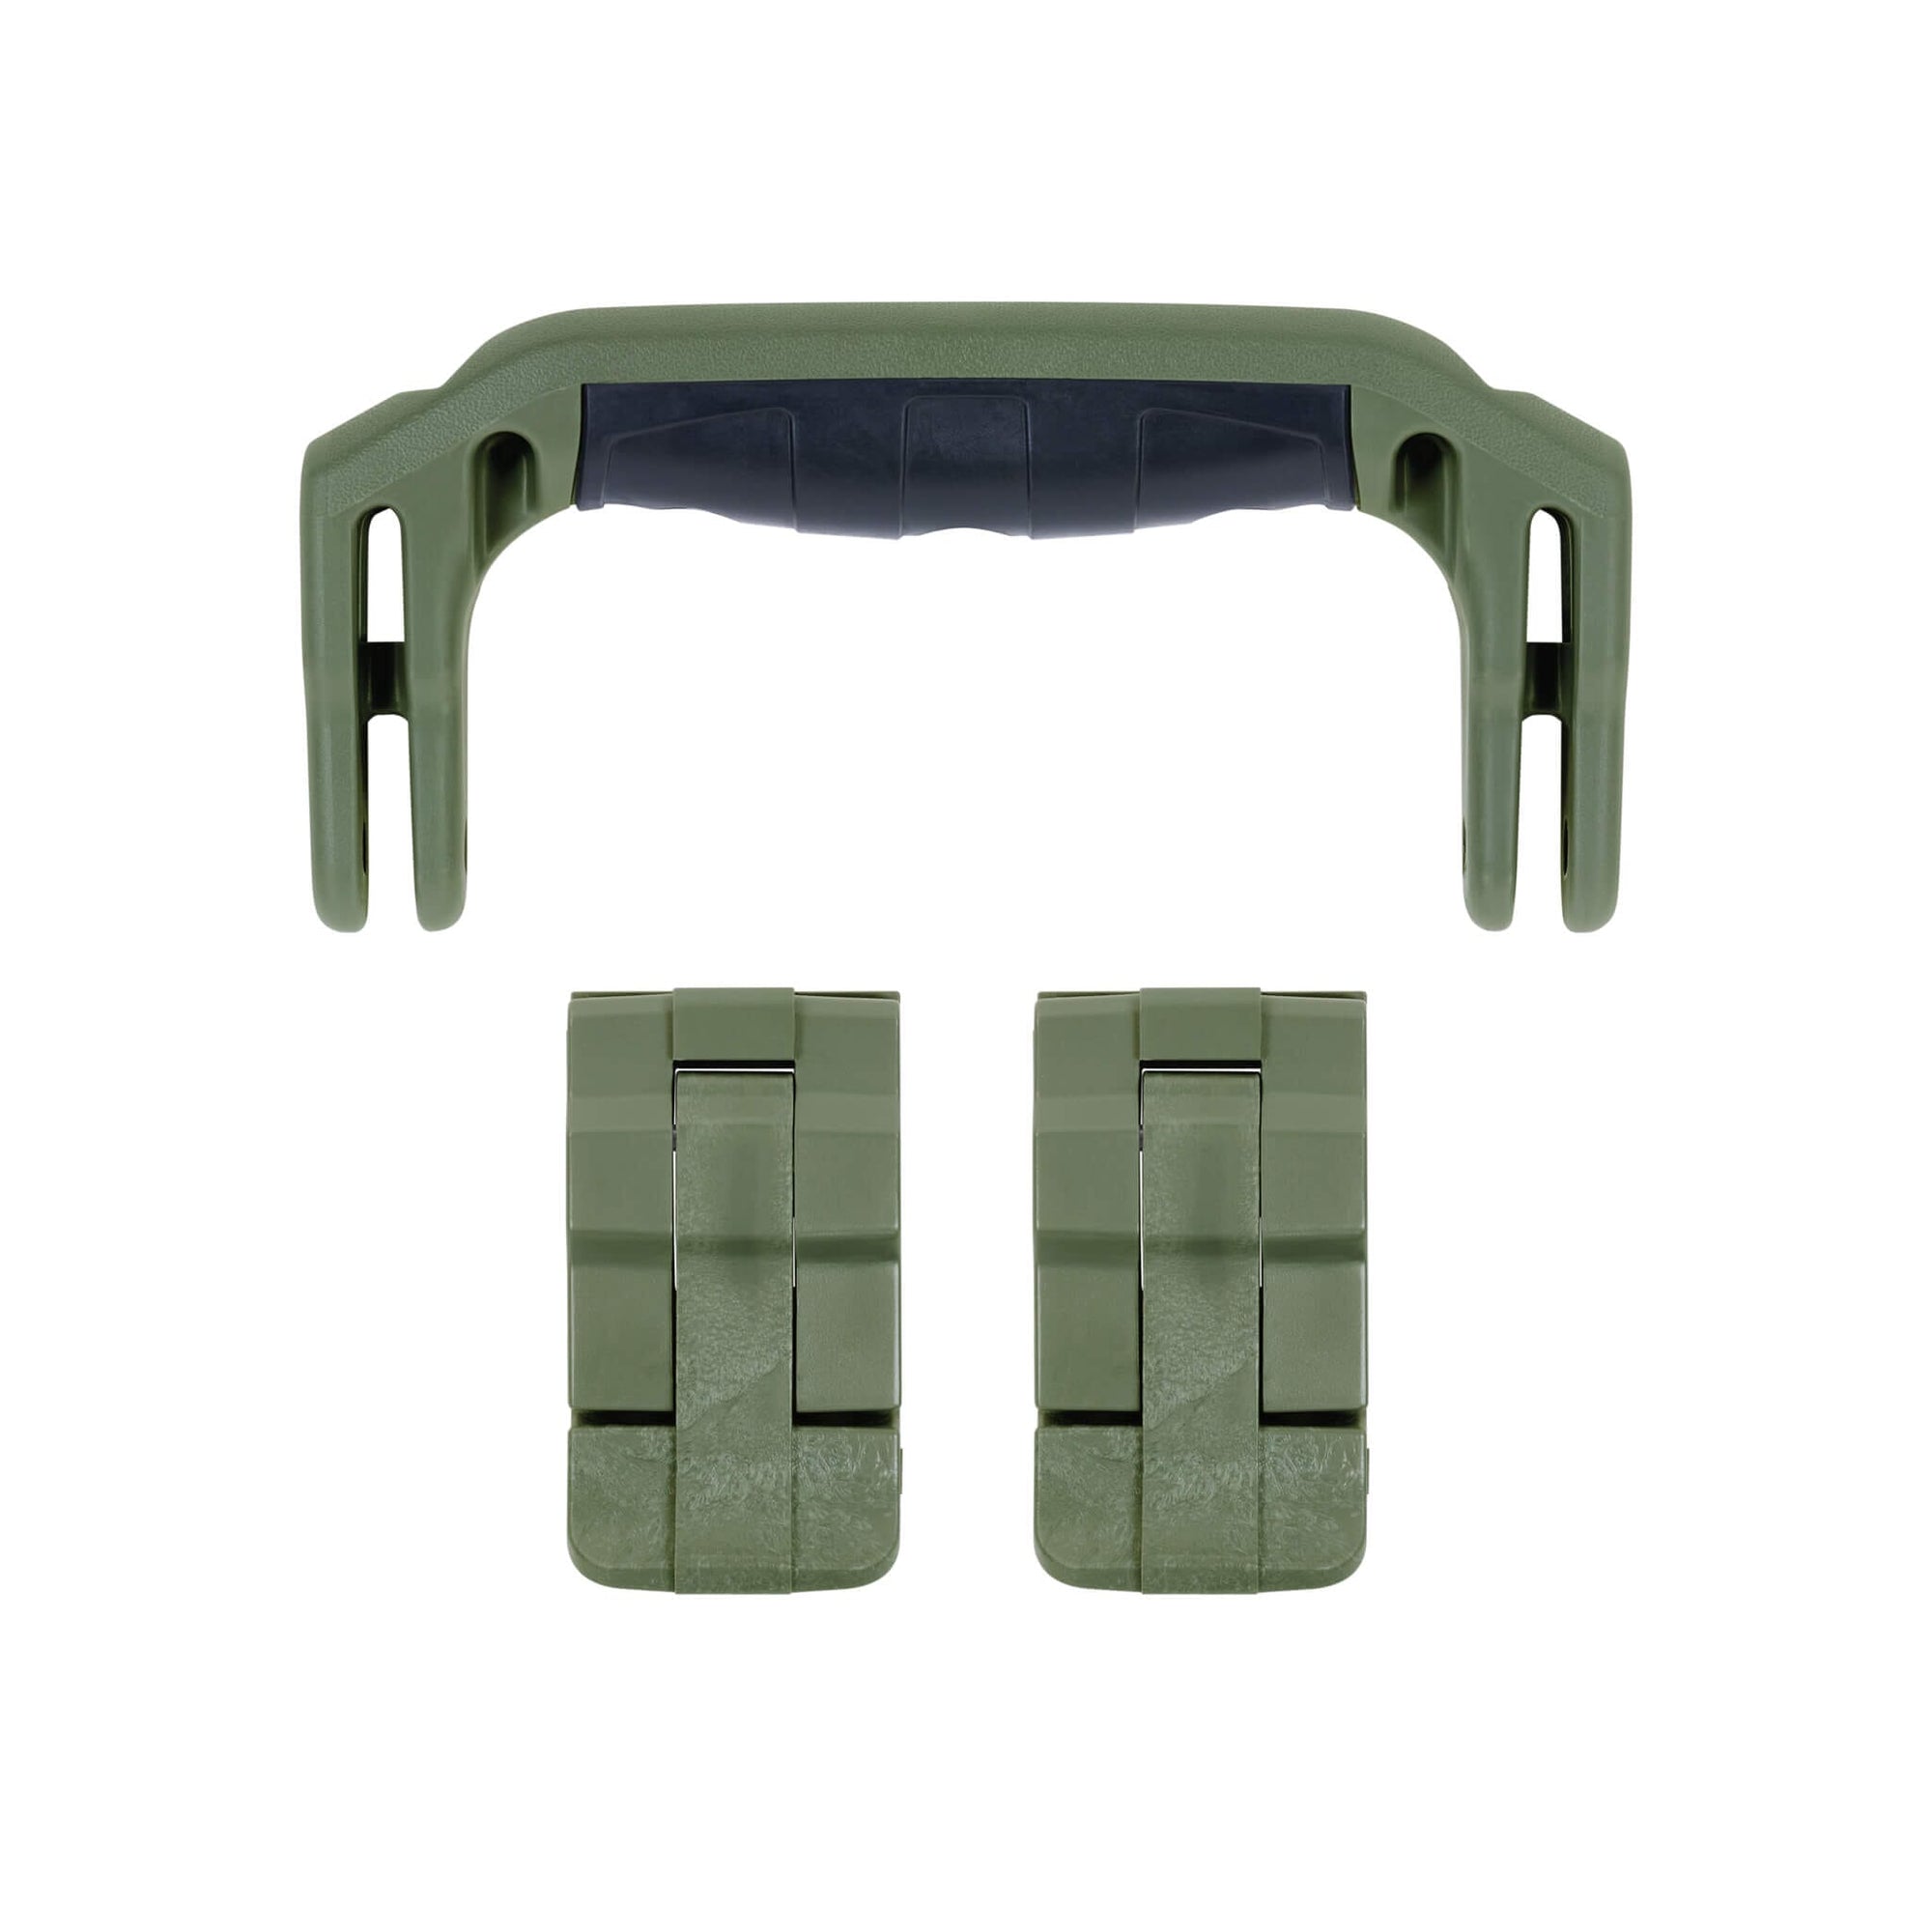 Pelican 1400 Replacement Handle & Latches, OD Green (Set of 1 Handle, 2 Latches) ColorCase 